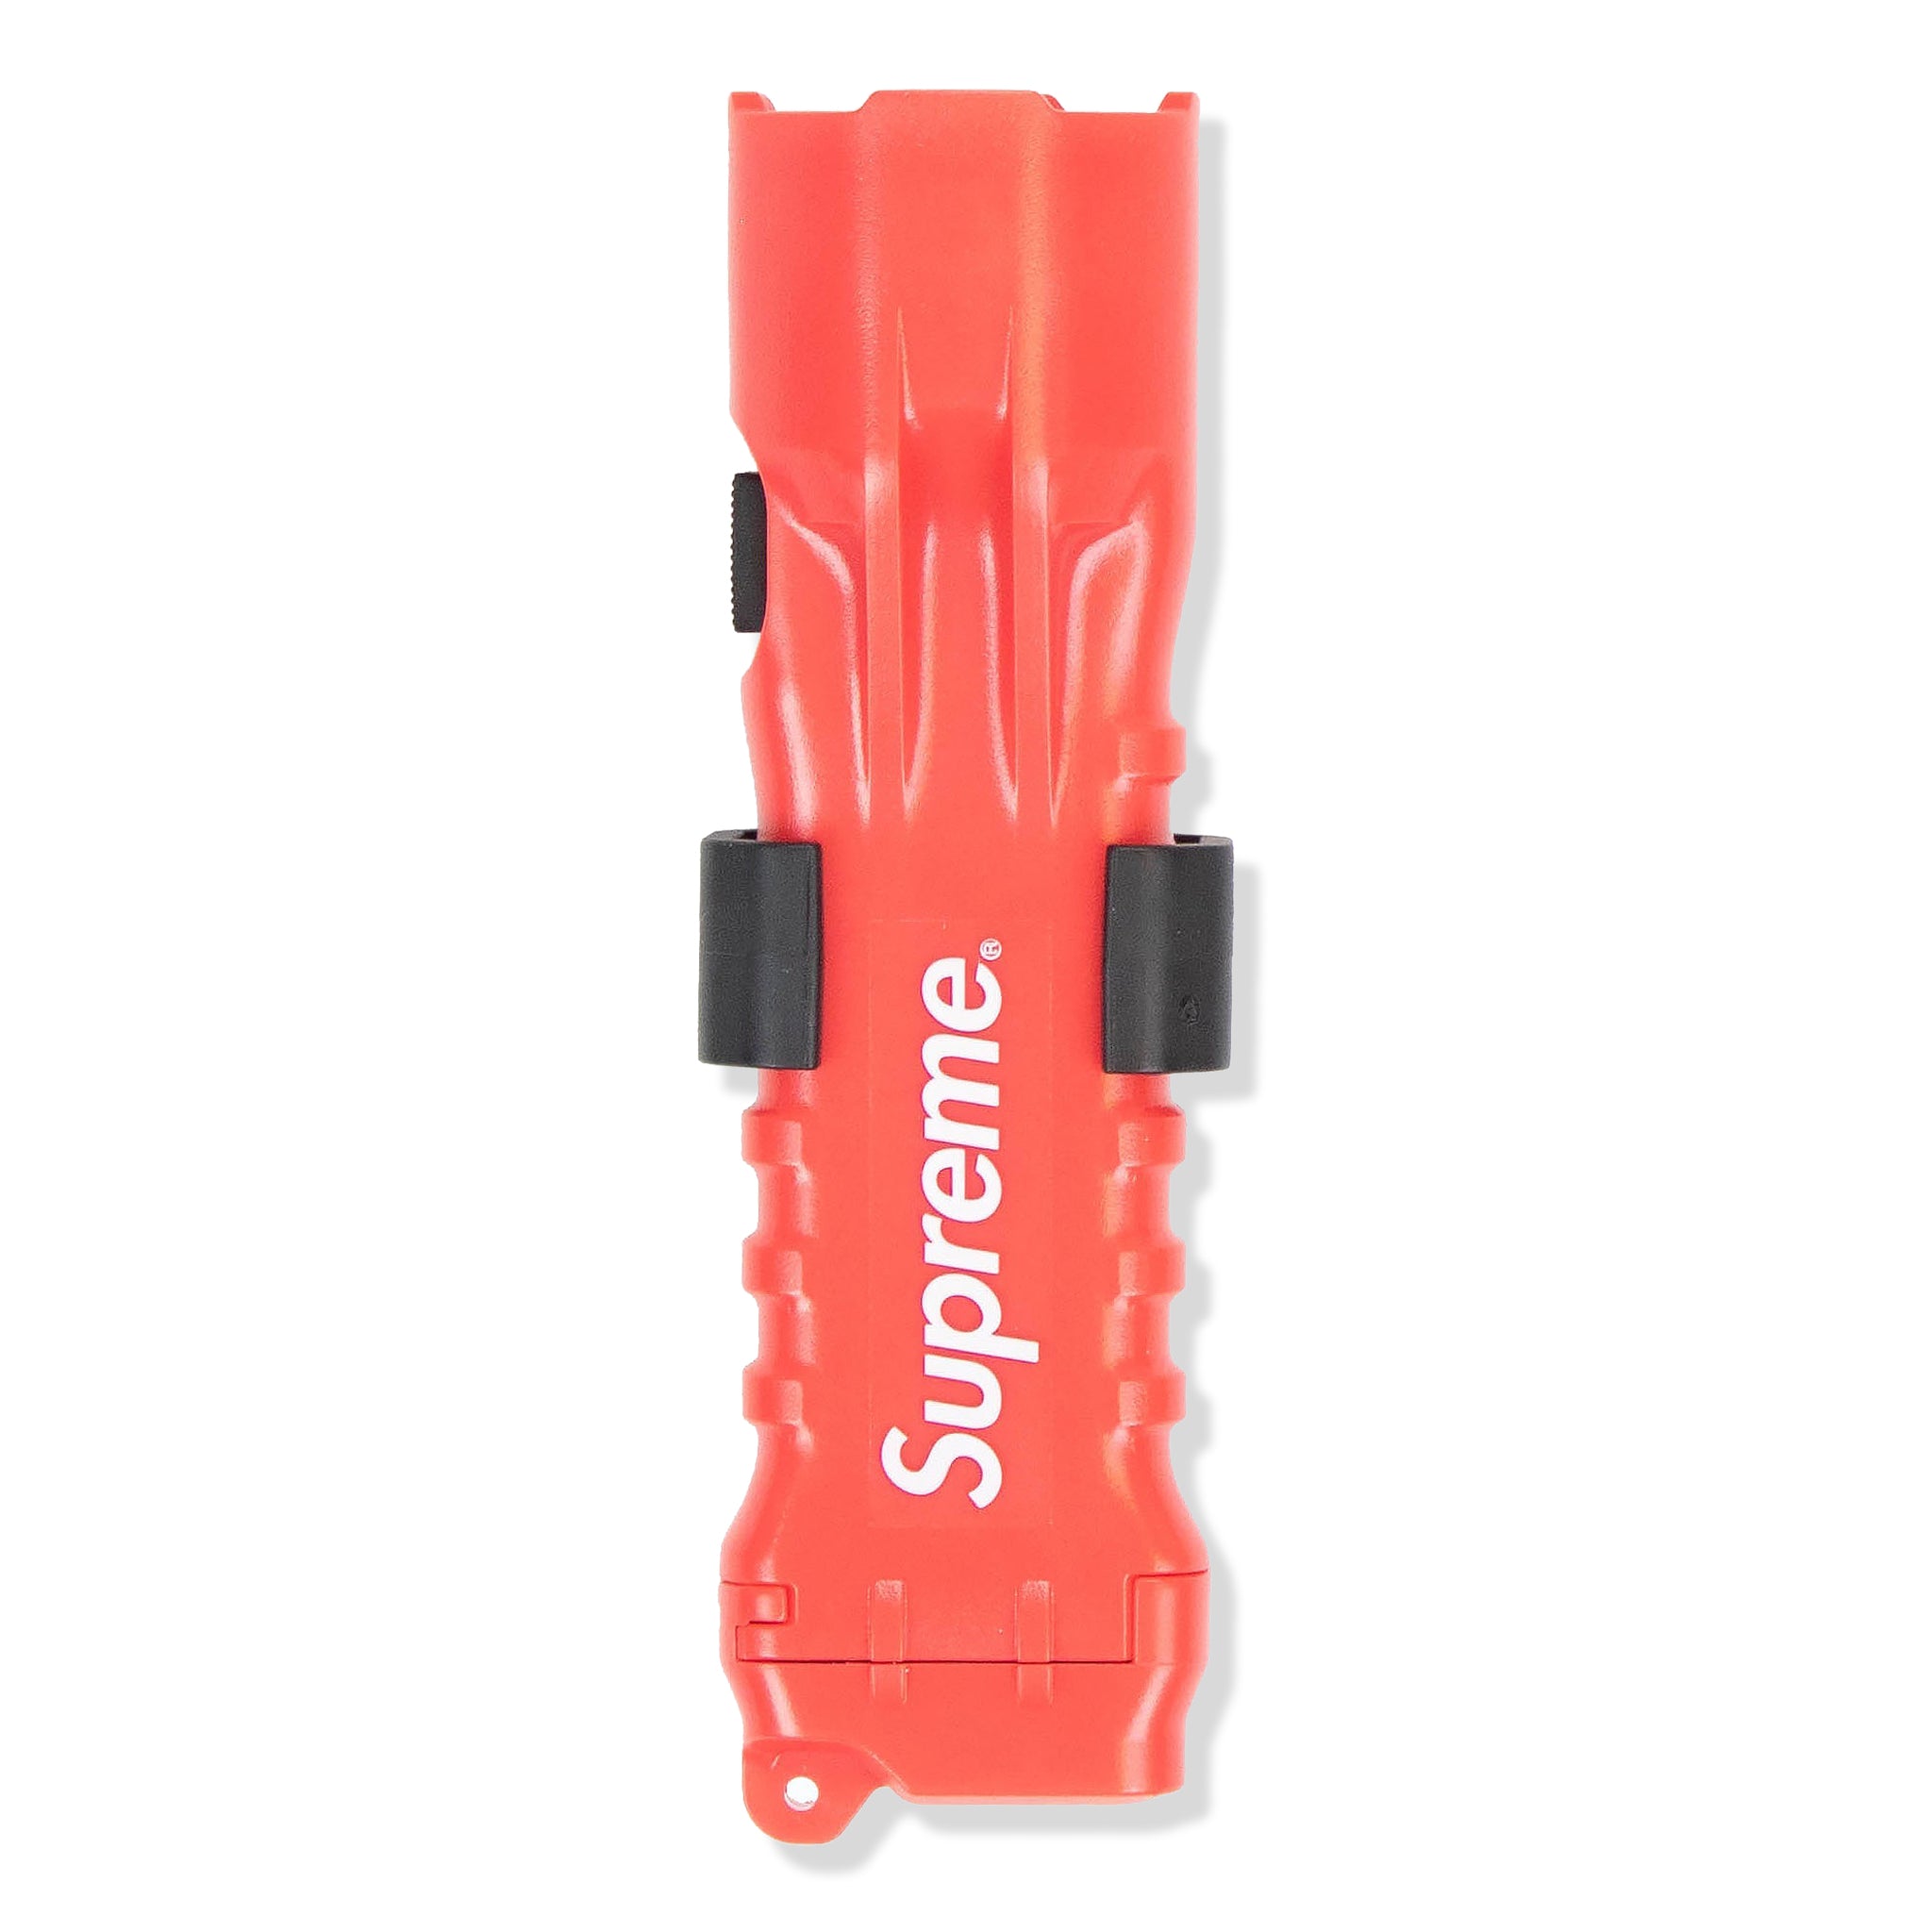 Image of Supreme Pelican 3310 PL Flashlight Red